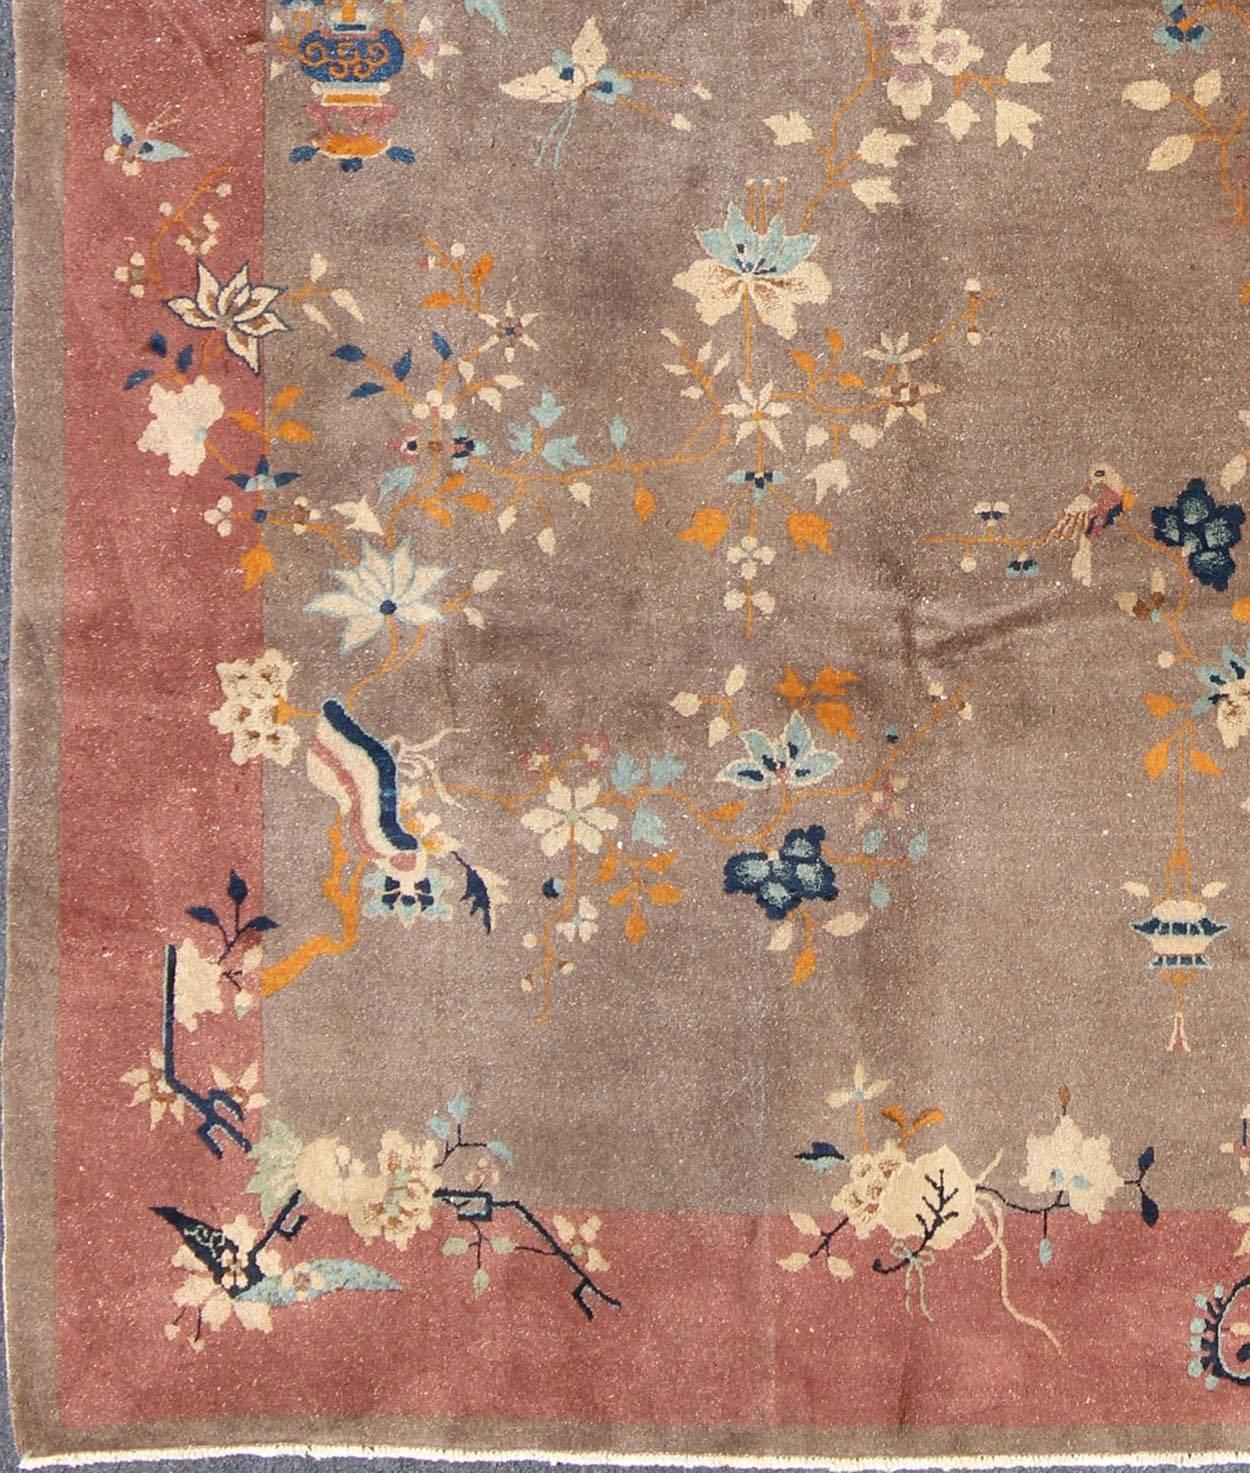 Handwoven in the first part of 20th Century, this antique Chinese rug features a light brown field with a rose and salmon border that decorates the uniquely colored piece. Inspired by ancient Chinese motifs, the Art Deco design reflects the